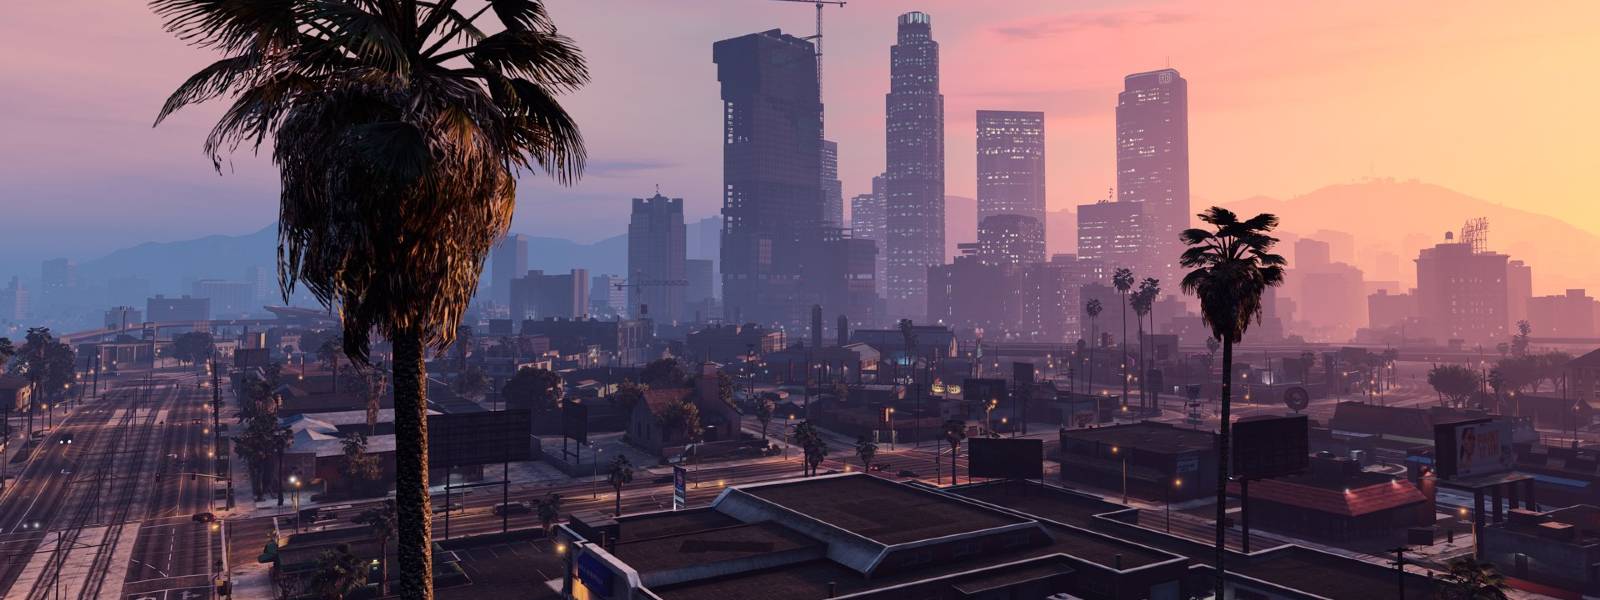 GTA 6 footage leaked, company says development will continue as planned